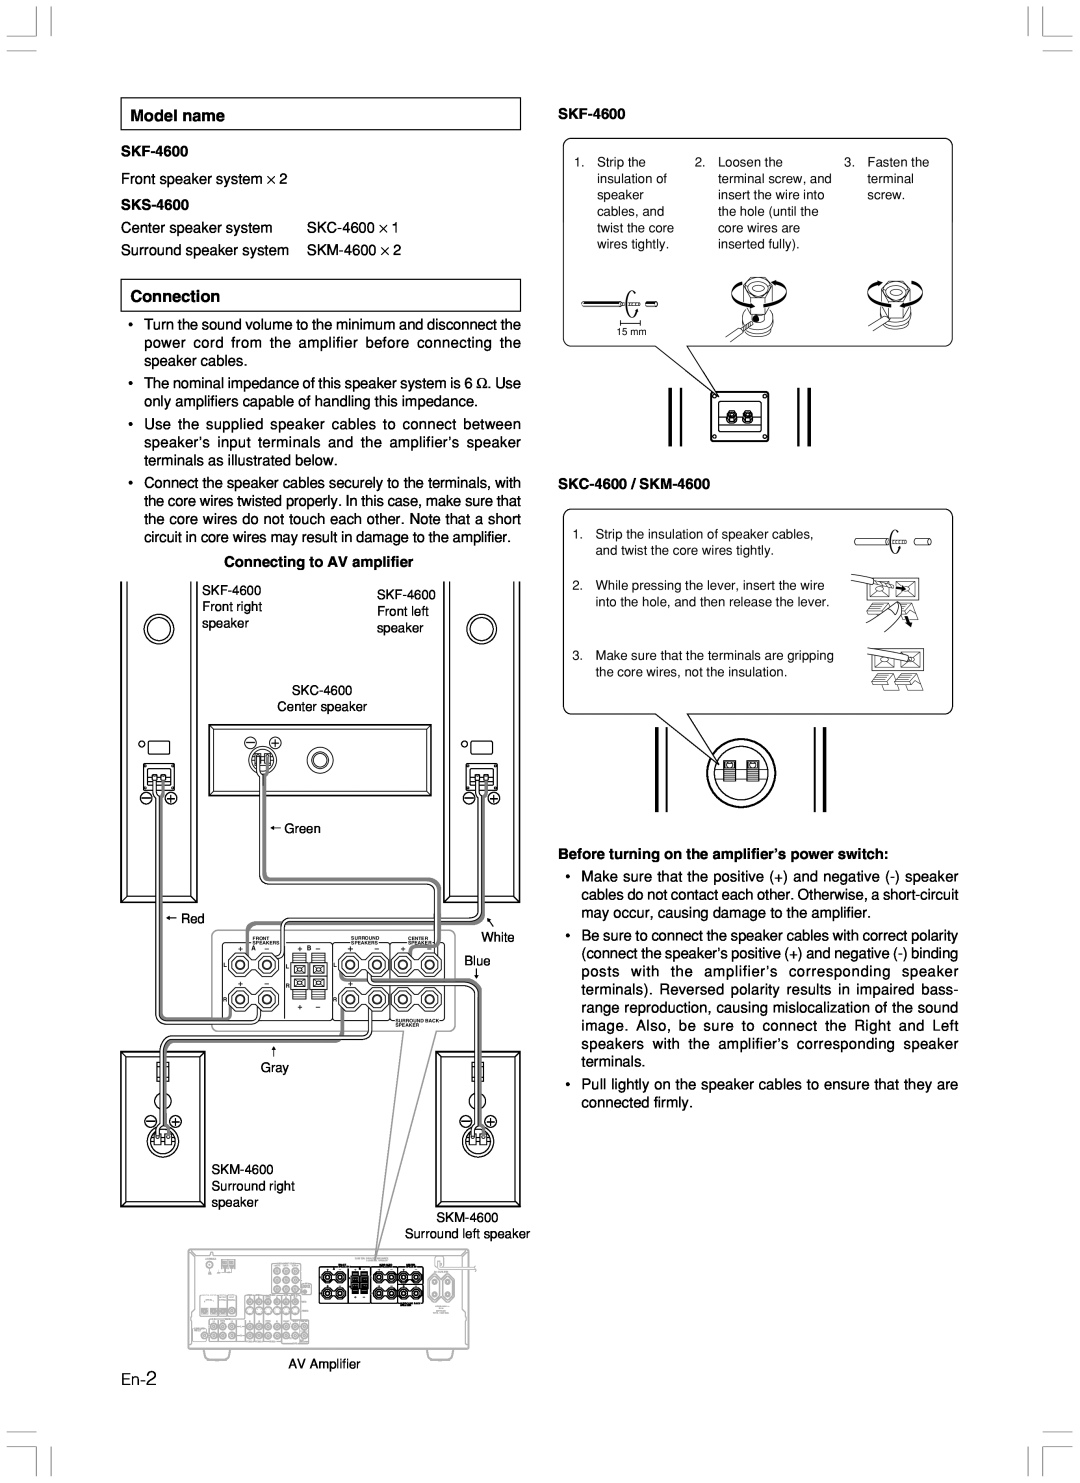 Onkyo SKS-4600 instruction manual Model name, Connection 